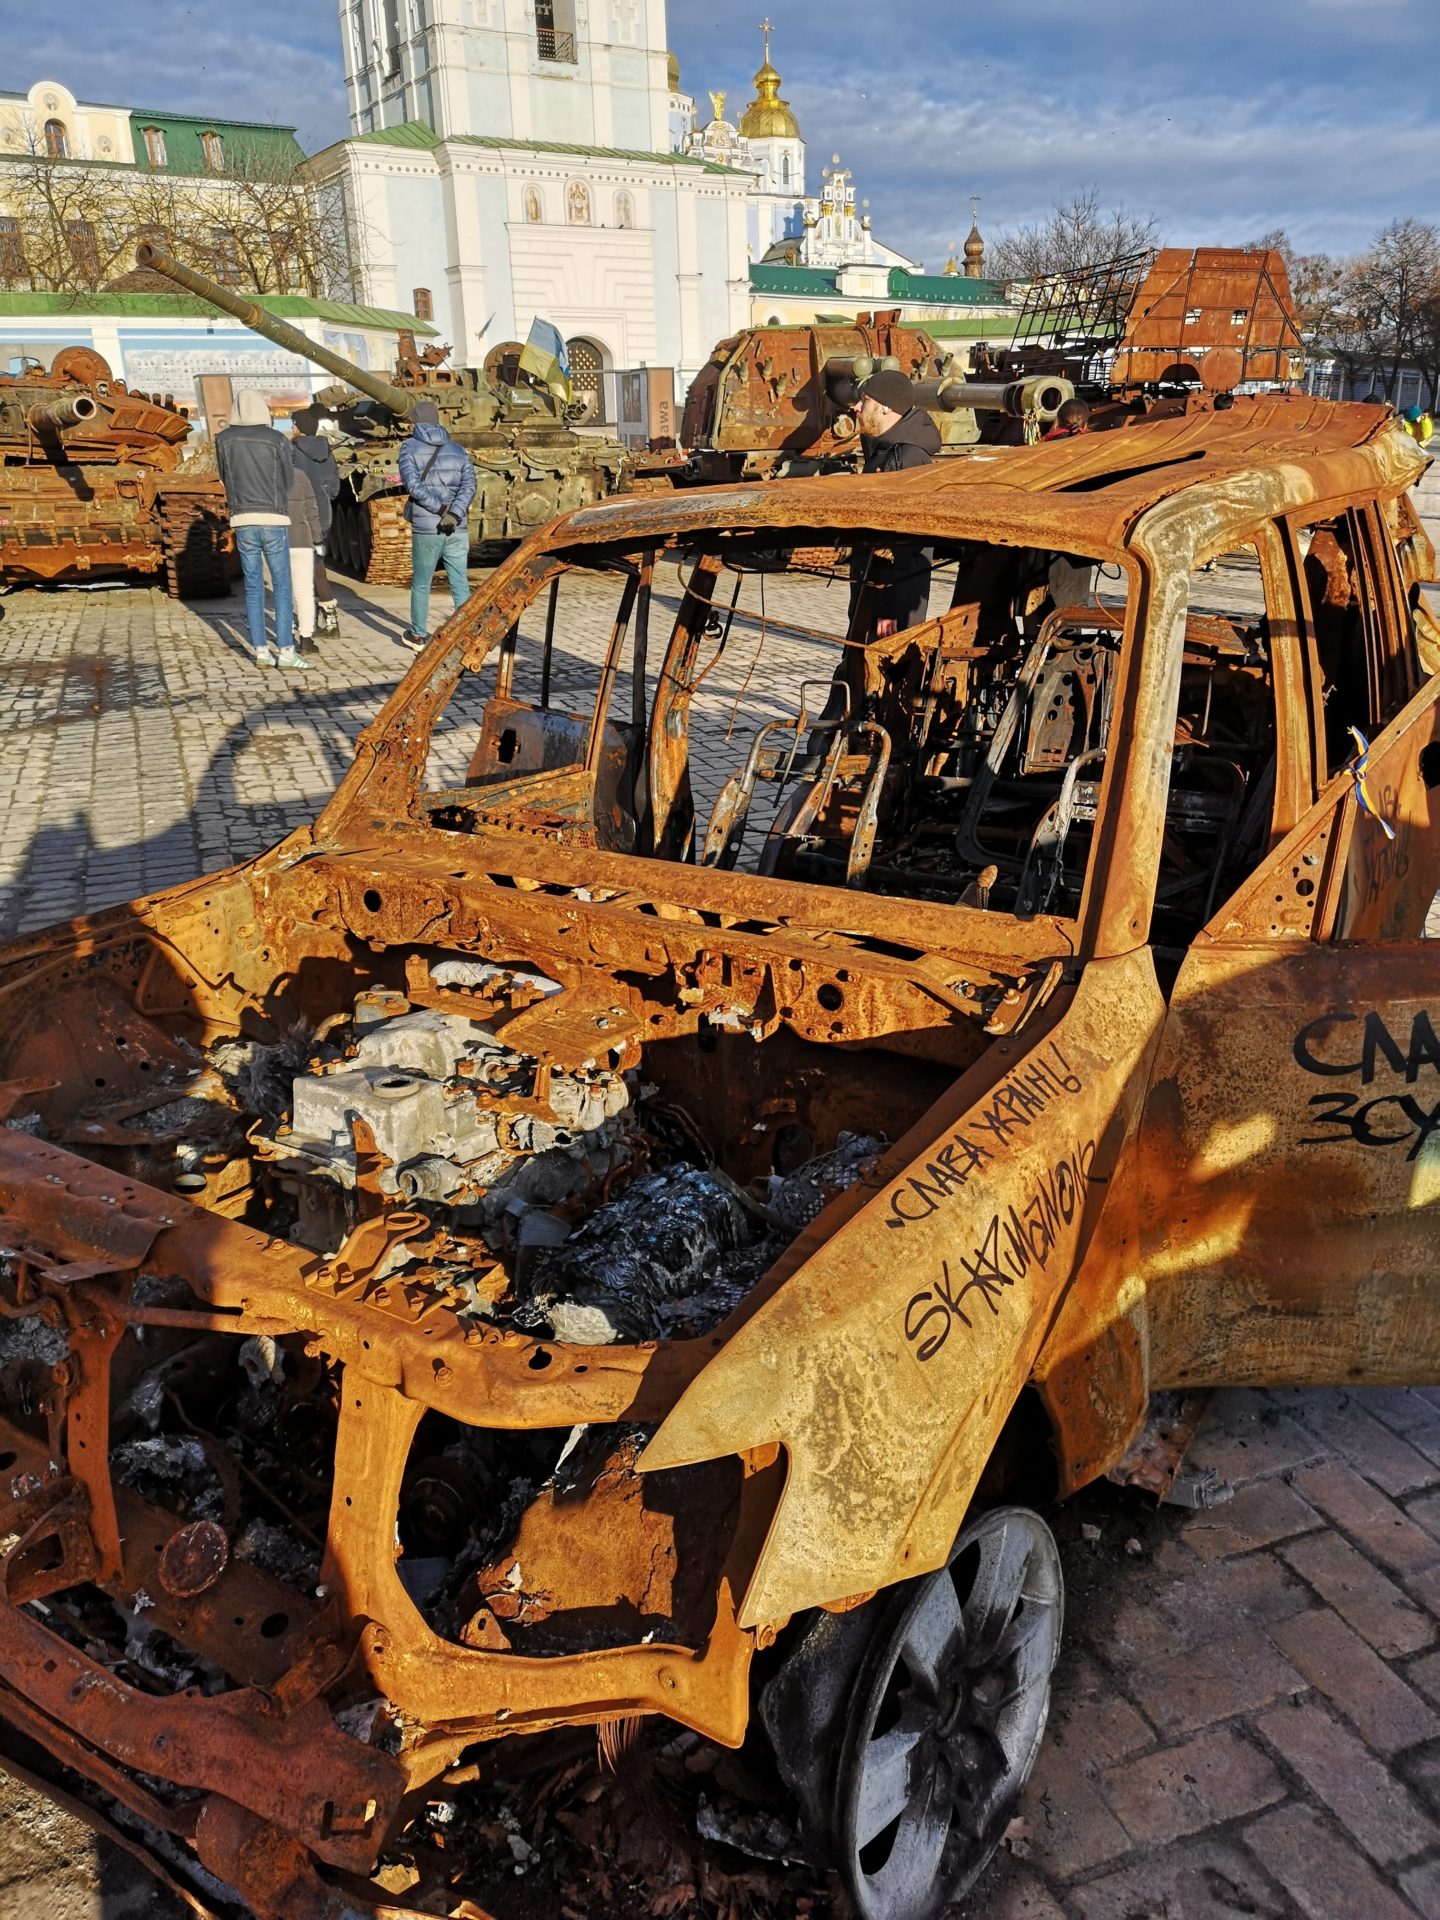 A burned-out military vehicle in Kyiv. Image: Newstalk 